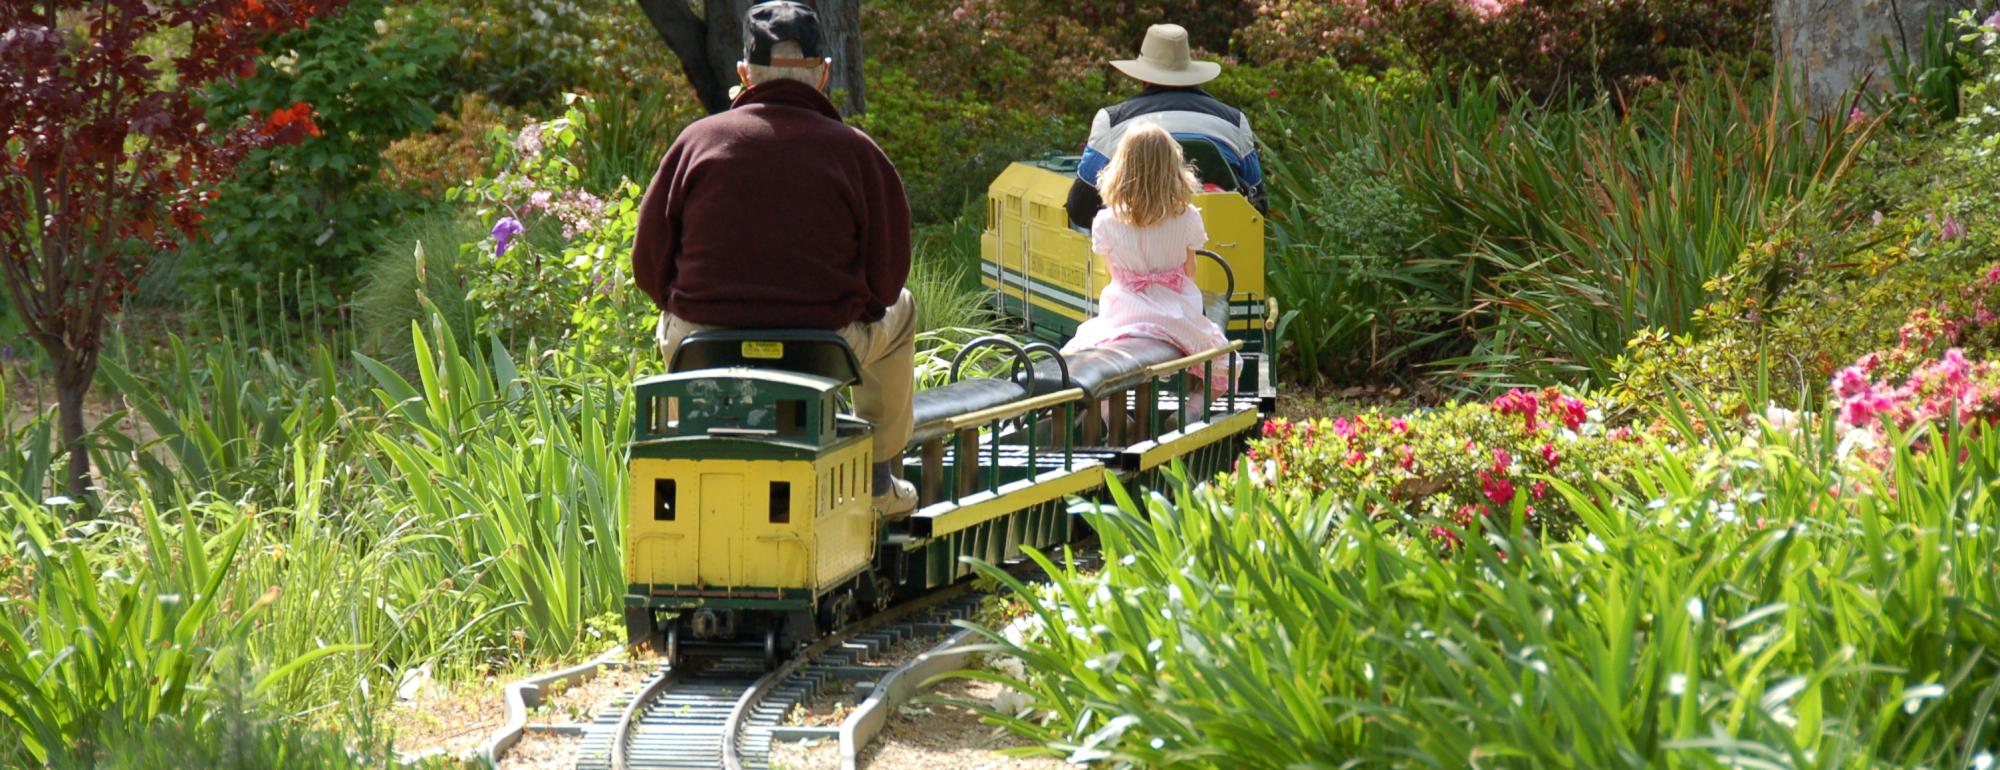 Image of two adults and a child on small train winding through a garden.